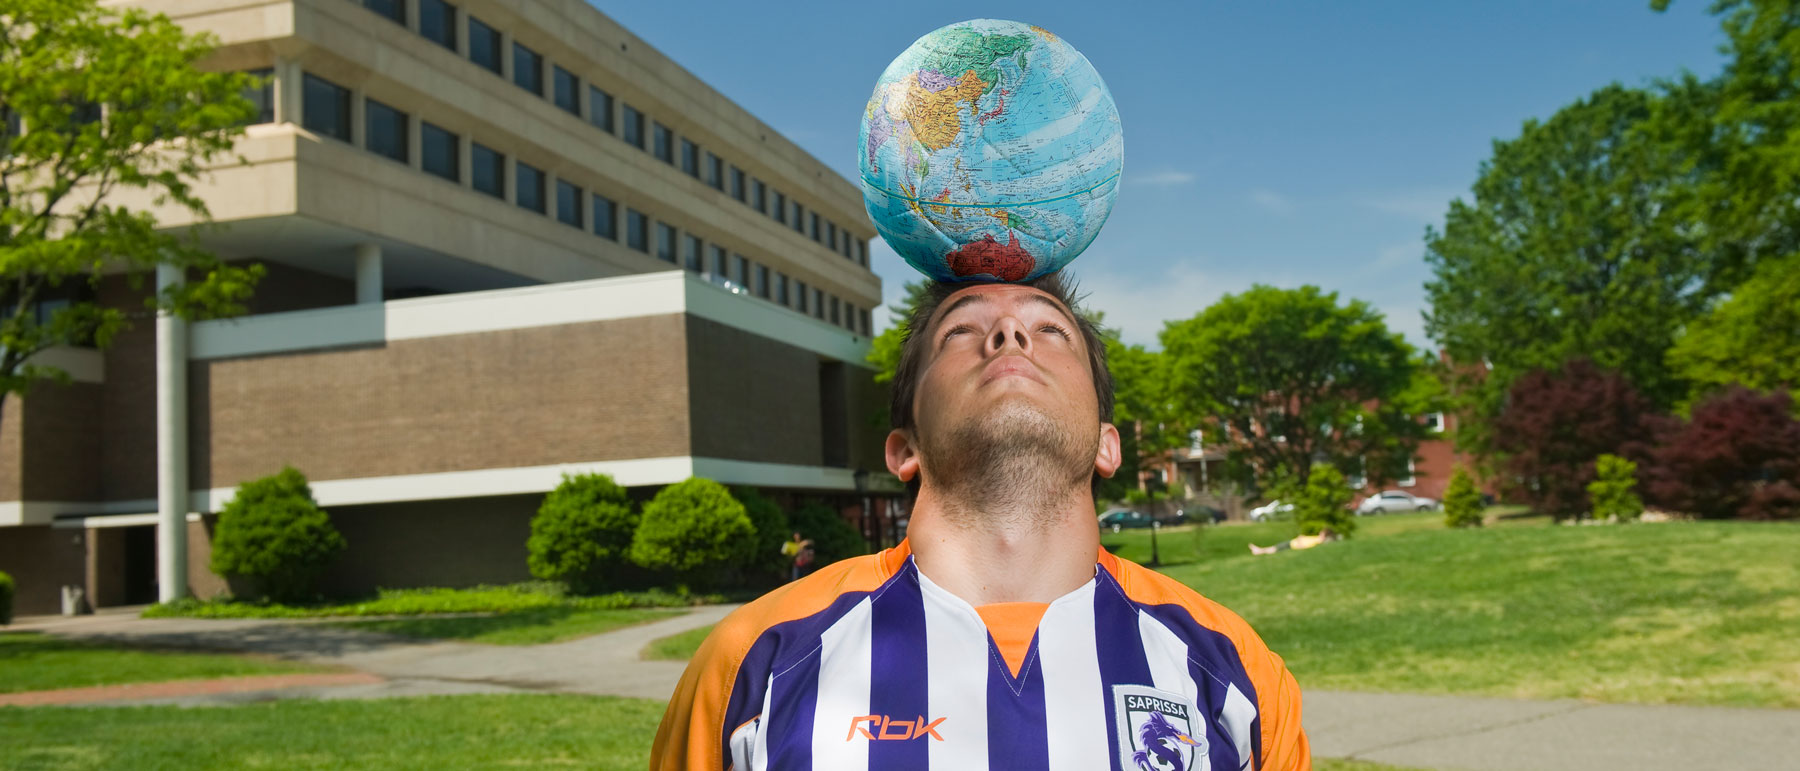 soccer player balancing a globe on top of his head in front of harris hall at v.c.u.